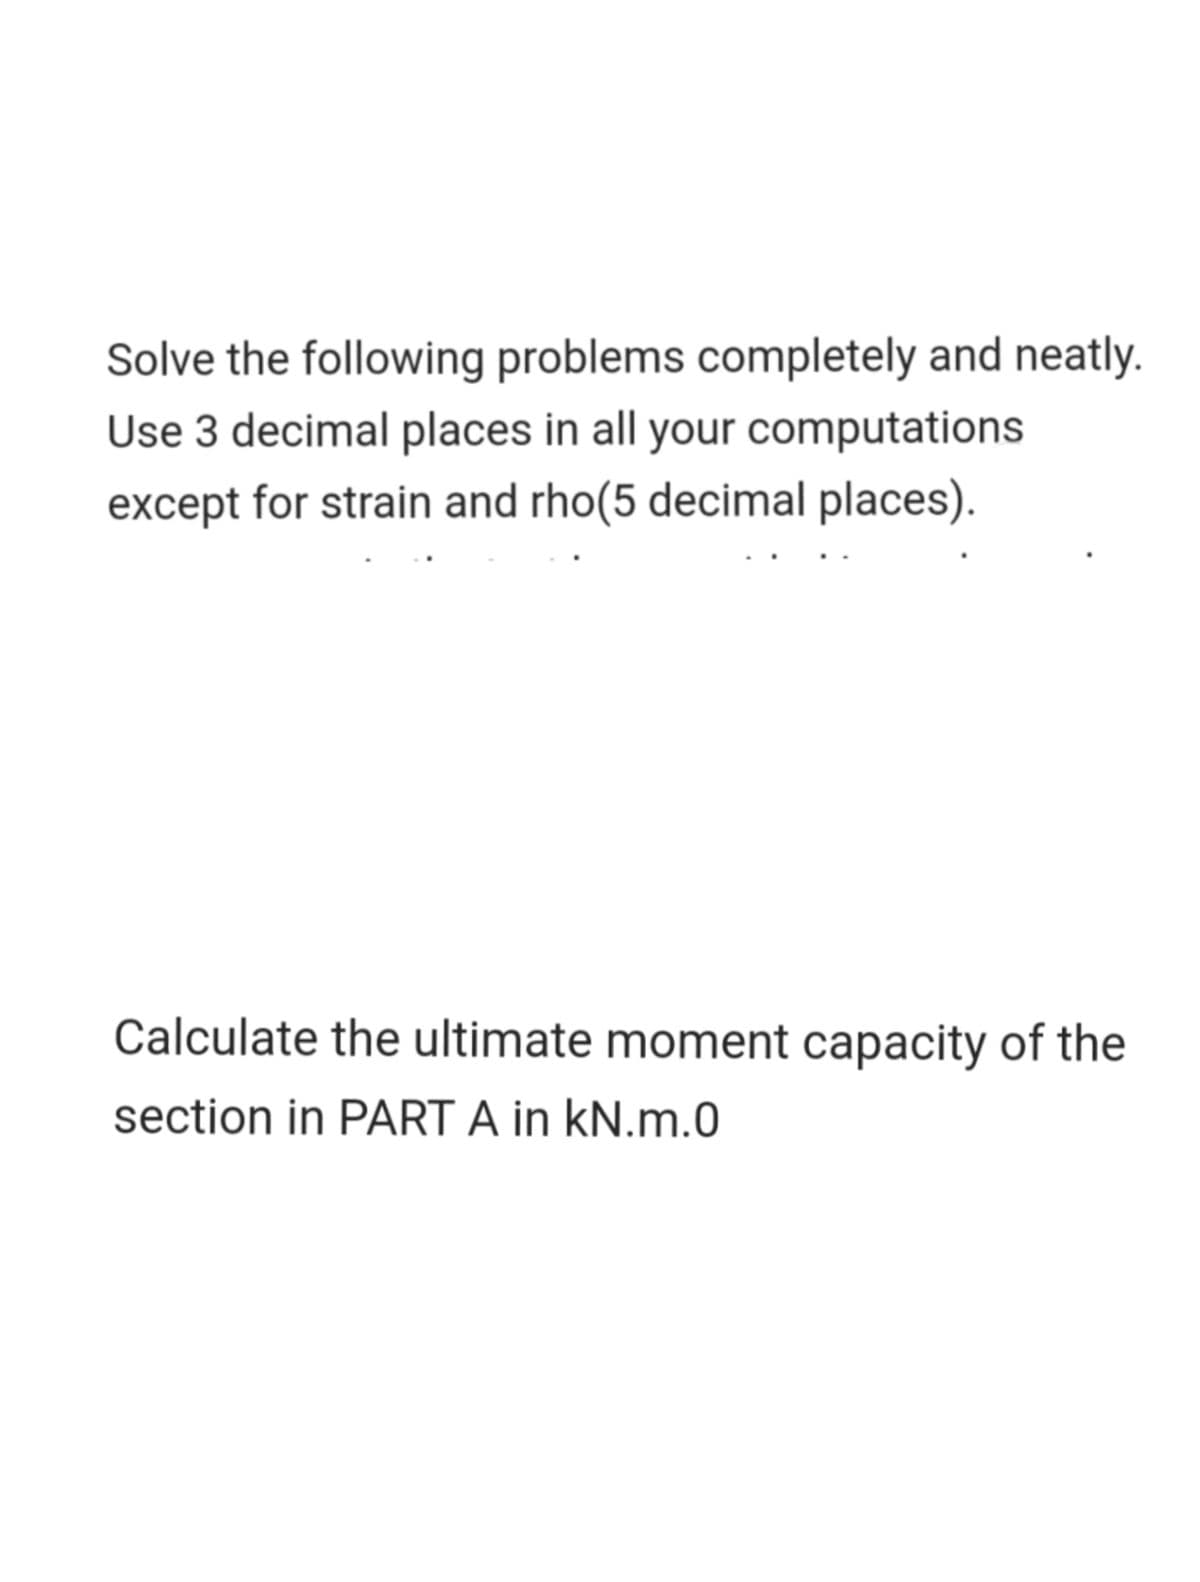 Solve the following problems completely and neatly.
Use 3 decimal places in all your computations
except for strain and rho(5 decimal places).
Calculate the ultimate moment capacity of the
section in PART A in kN.m.0